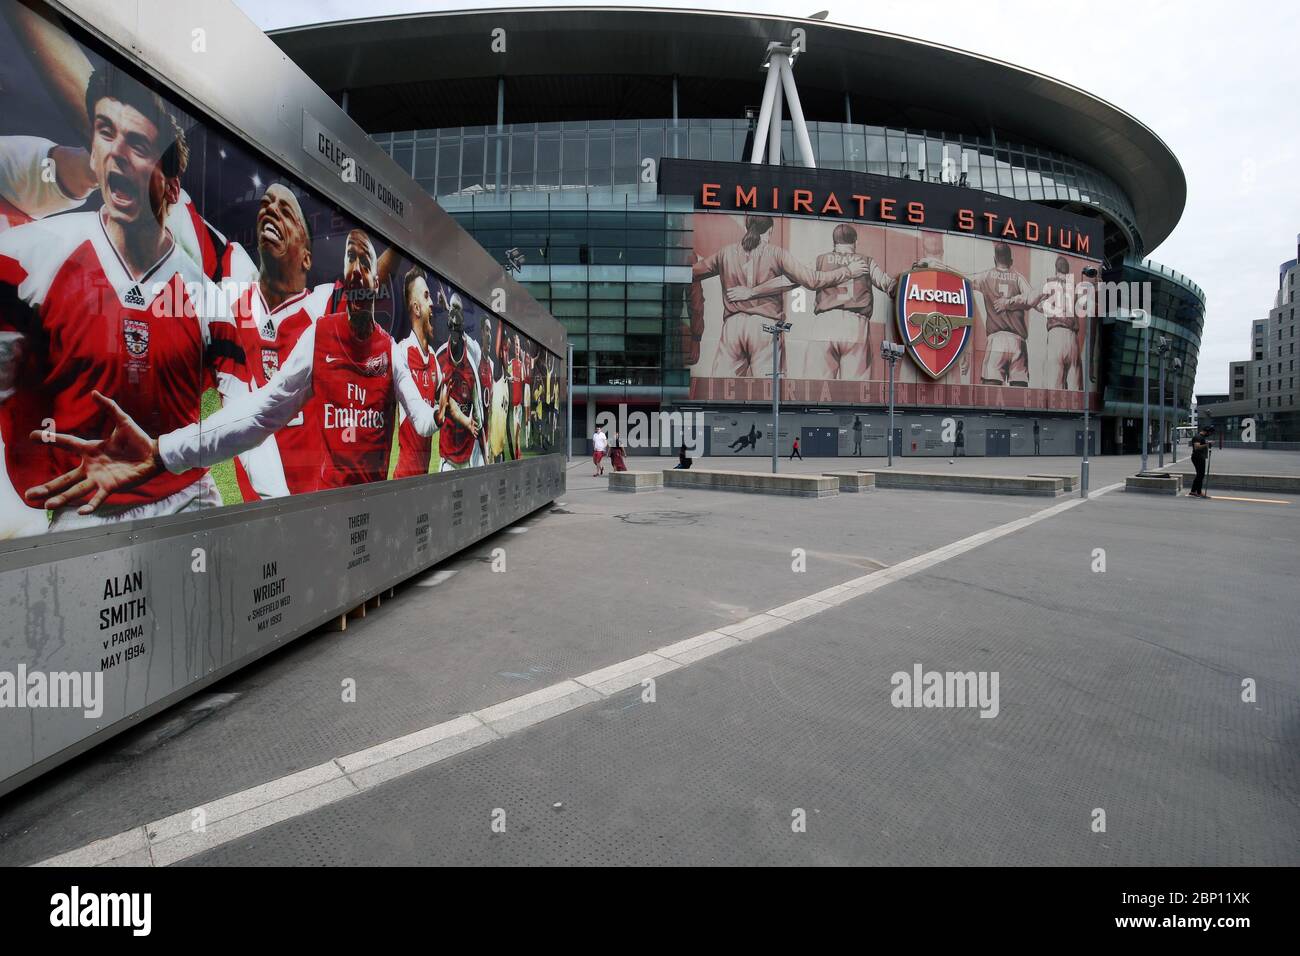 Emirates Stadium, home of Arsenal, today should have seen Arsenal take on Watford in what would have been their final Premier League game of the 19/20 season. Stock Photo